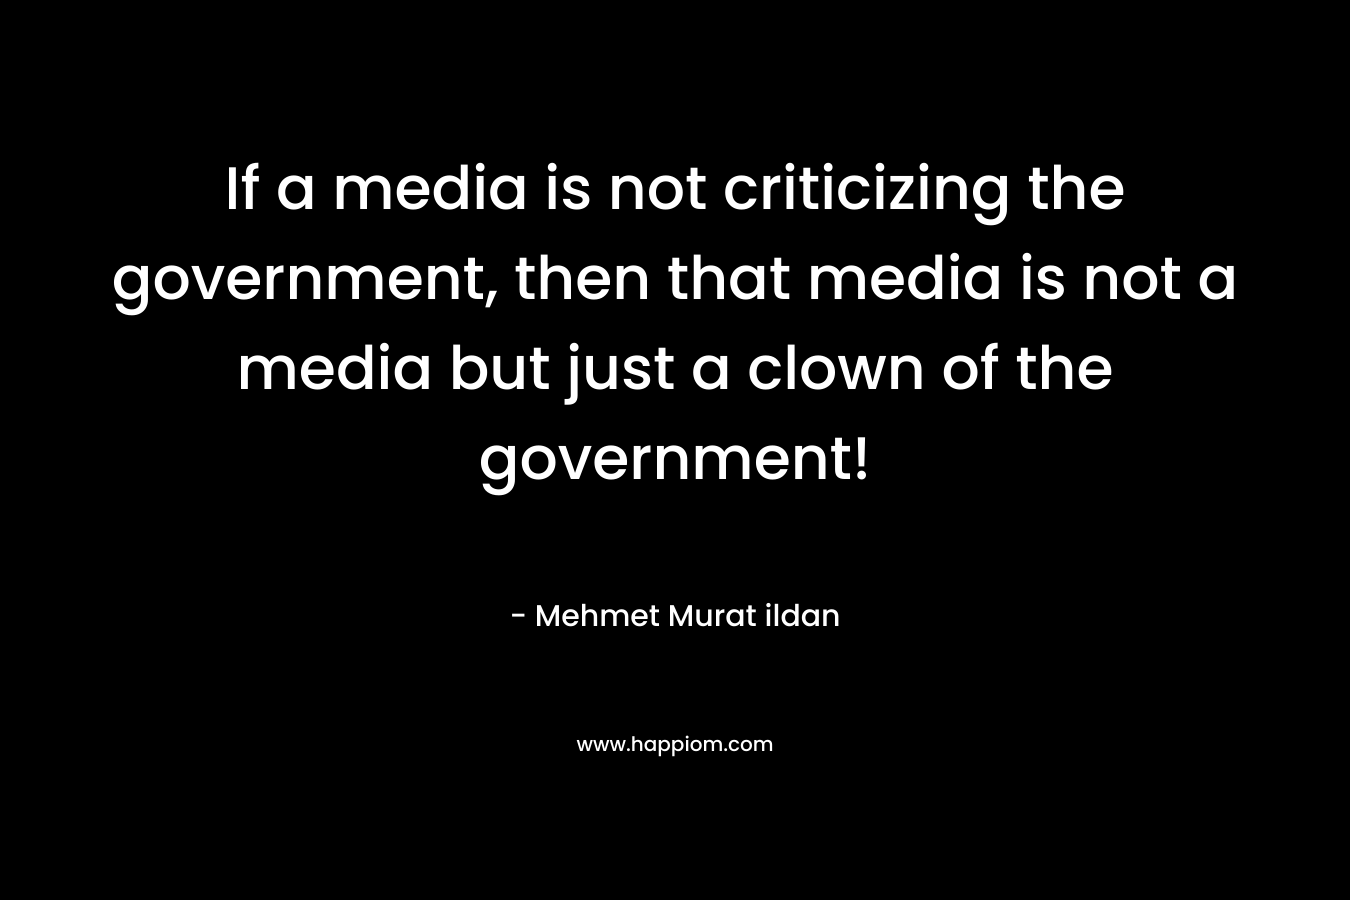 If a media is not criticizing the government, then that media is not a media but just a clown of the government! – Mehmet Murat ildan